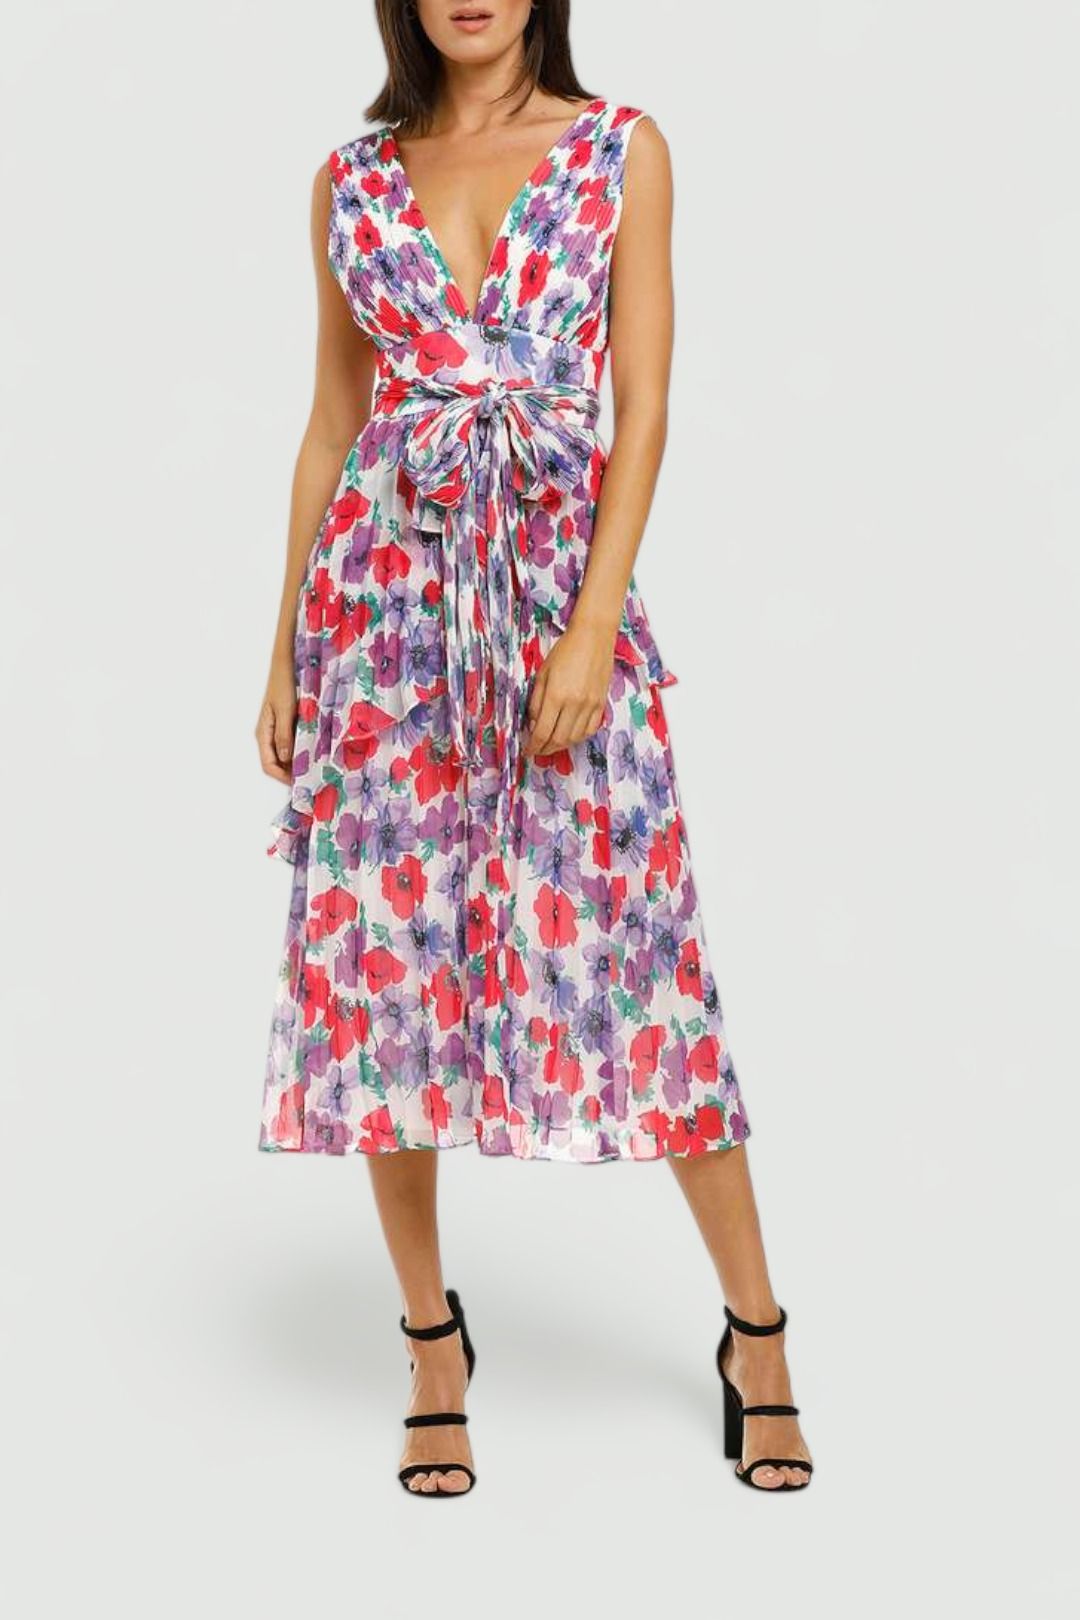 Sugar and Spice Midi Dress in Sugar Bloom by Talulah for Hire | GlamCorner